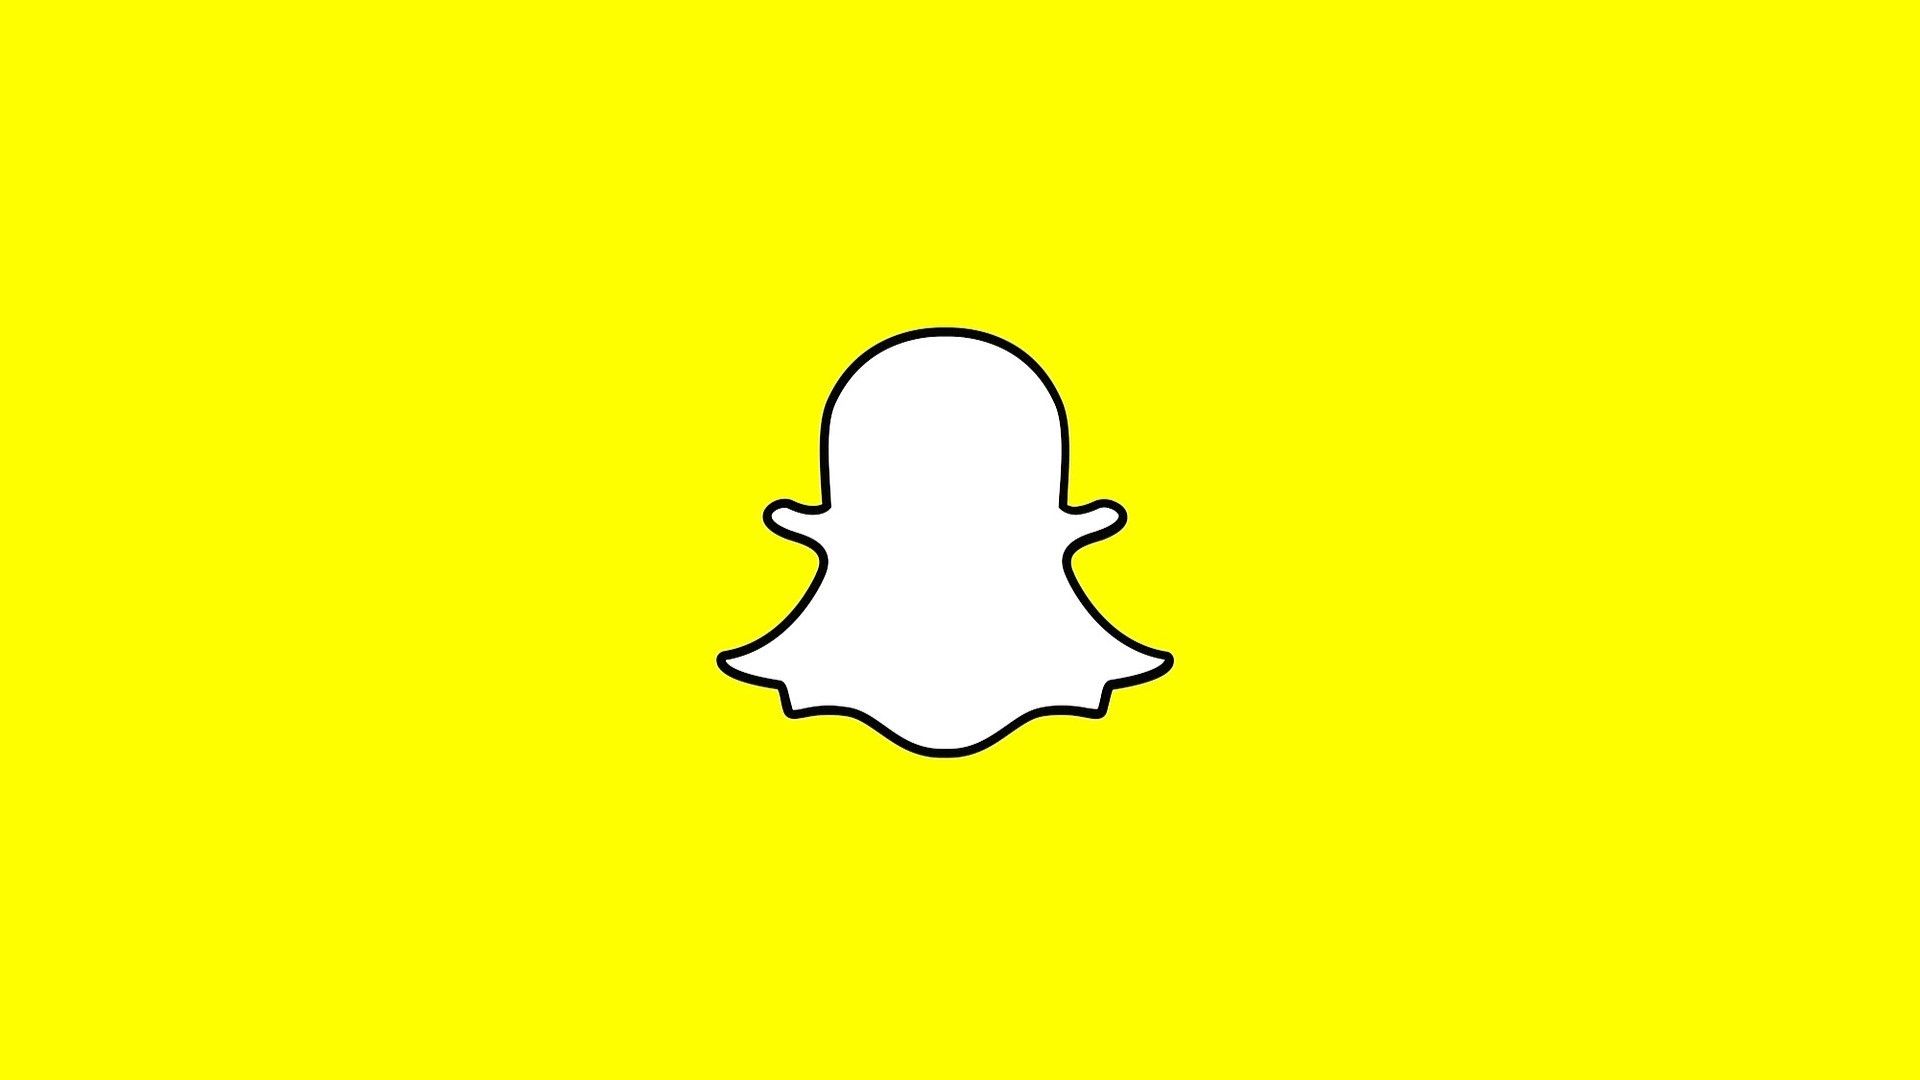 The Snapchat ghost mascot against a yellow background. 